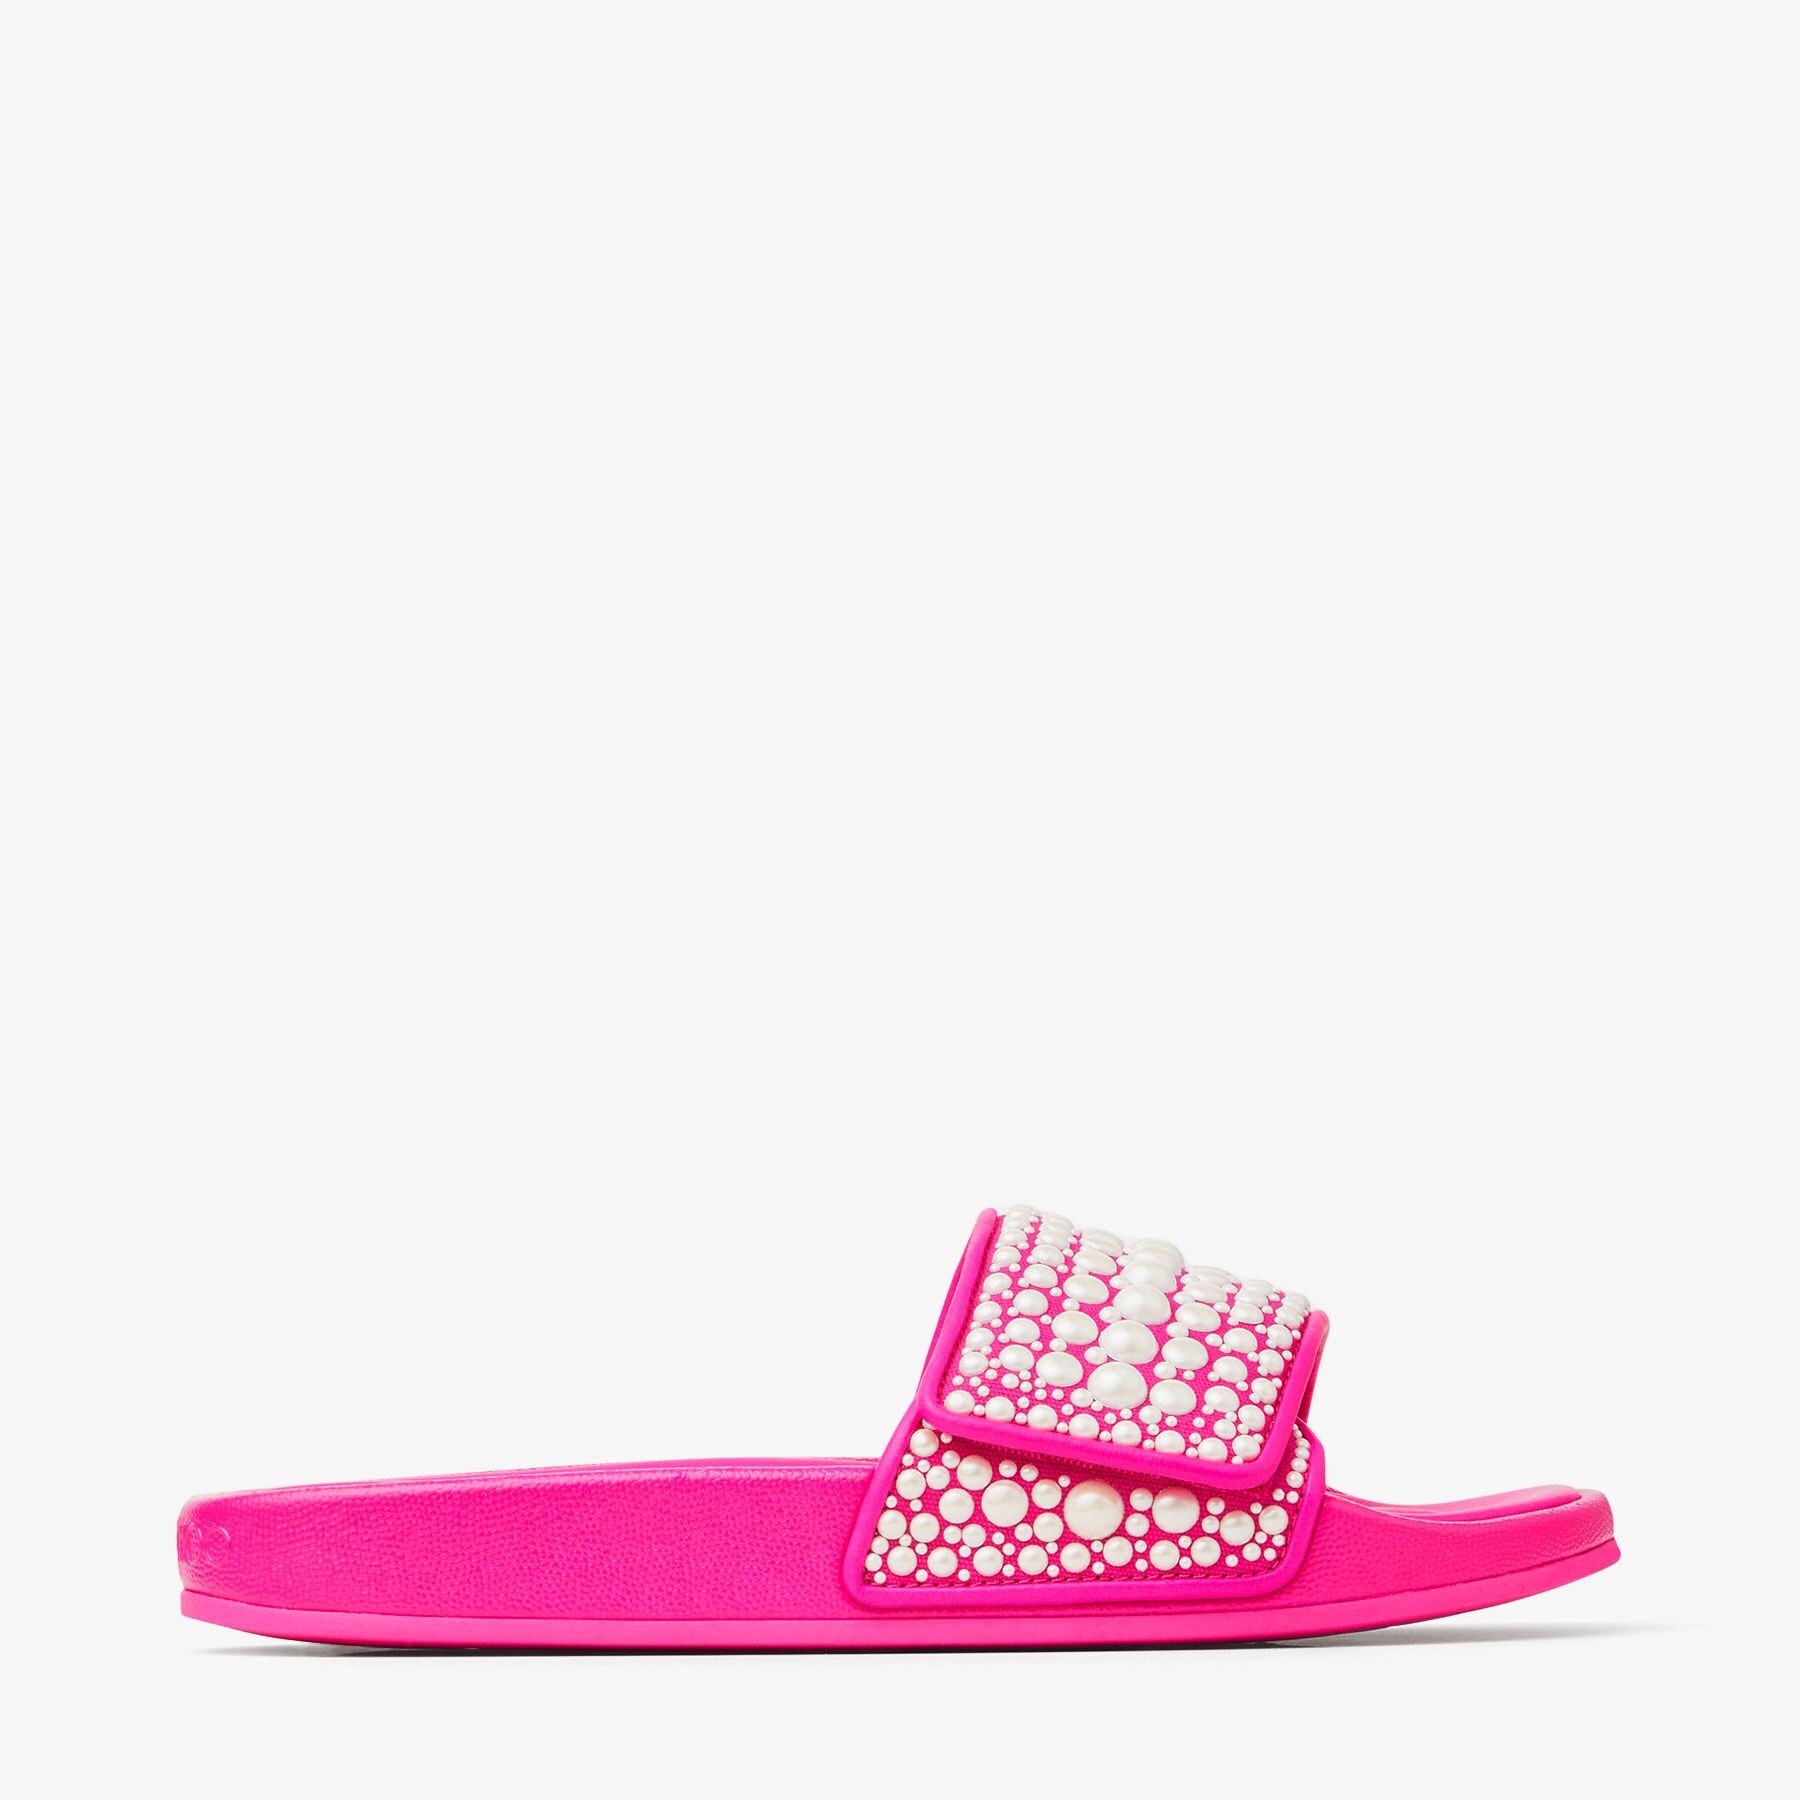 Fitz/F
Fuchsia Leather and Canvas Slides with Pearl Embellishment - 1